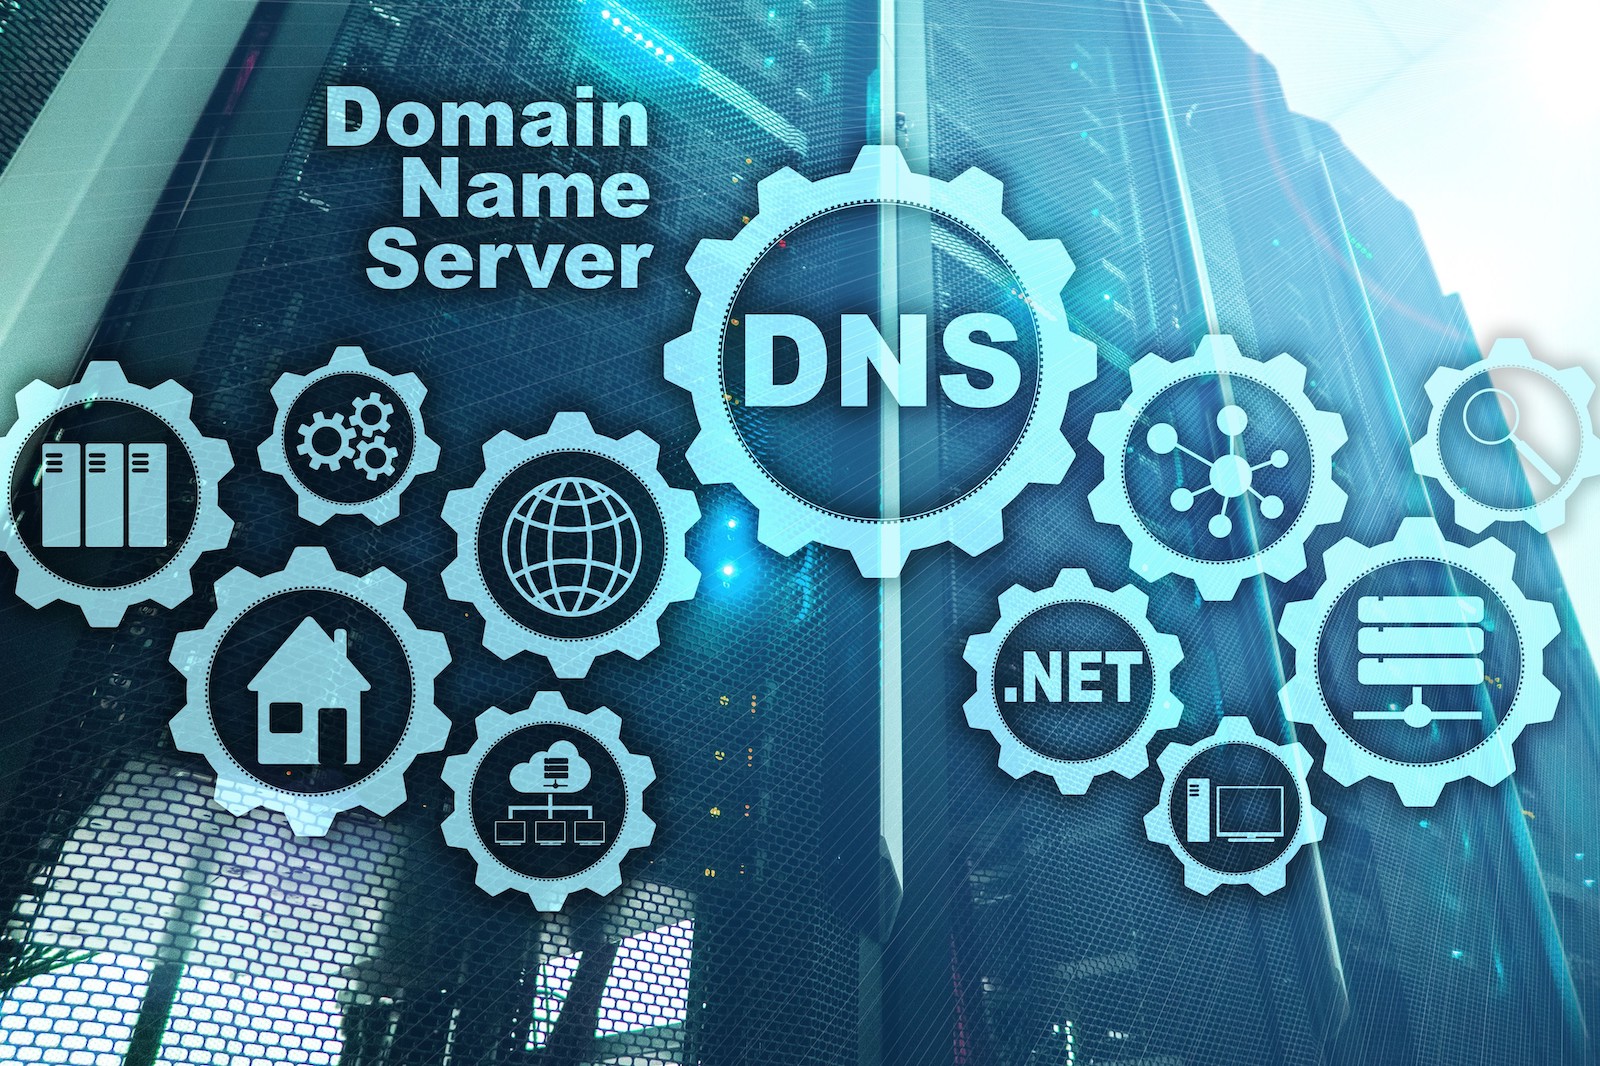 DNS is the domain name system (conceptual image)